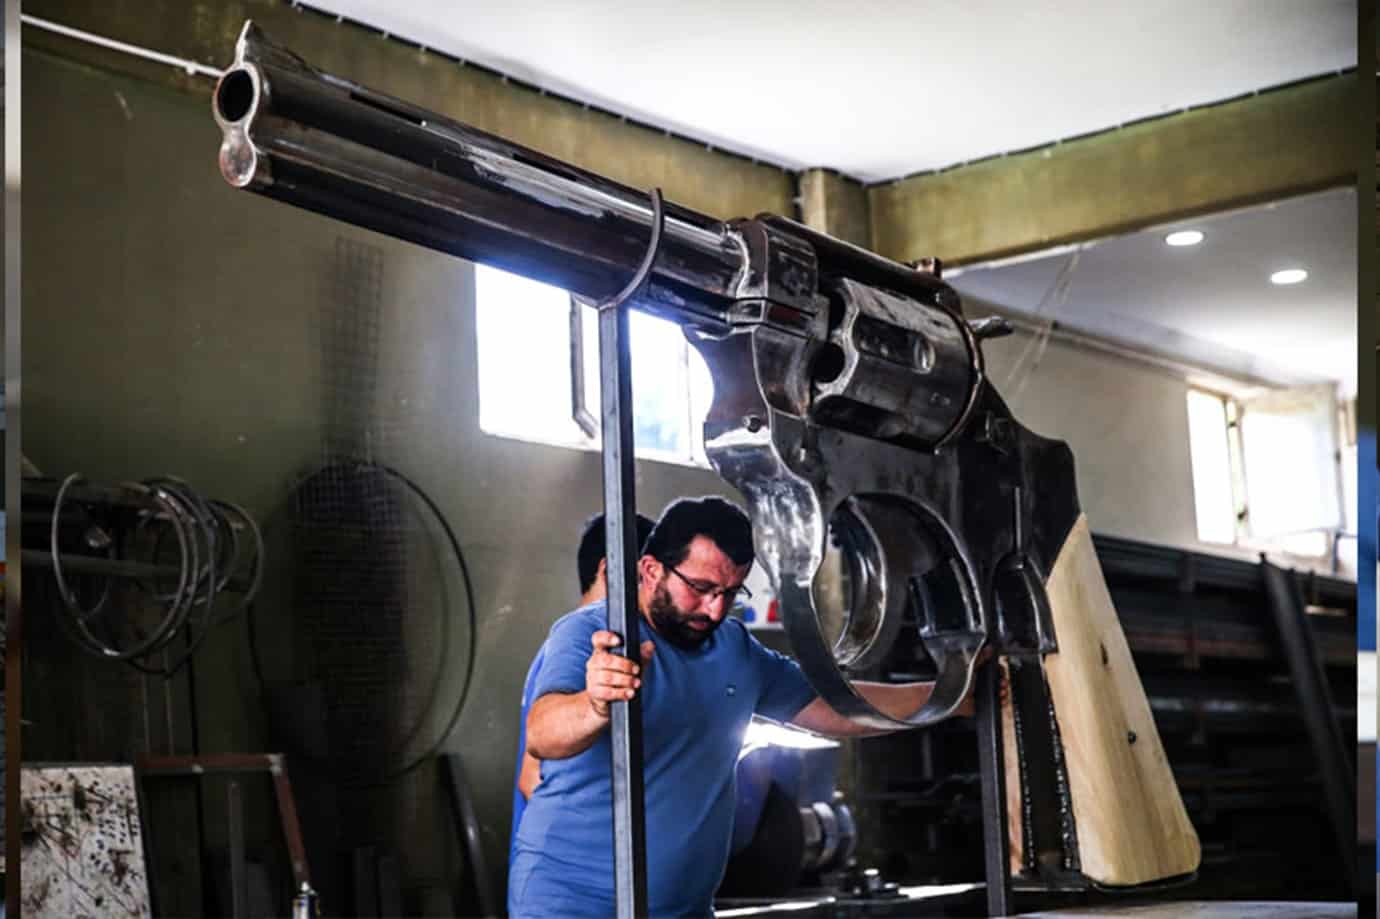 He made a giant pistol weighing 100 kg and 3 meters long